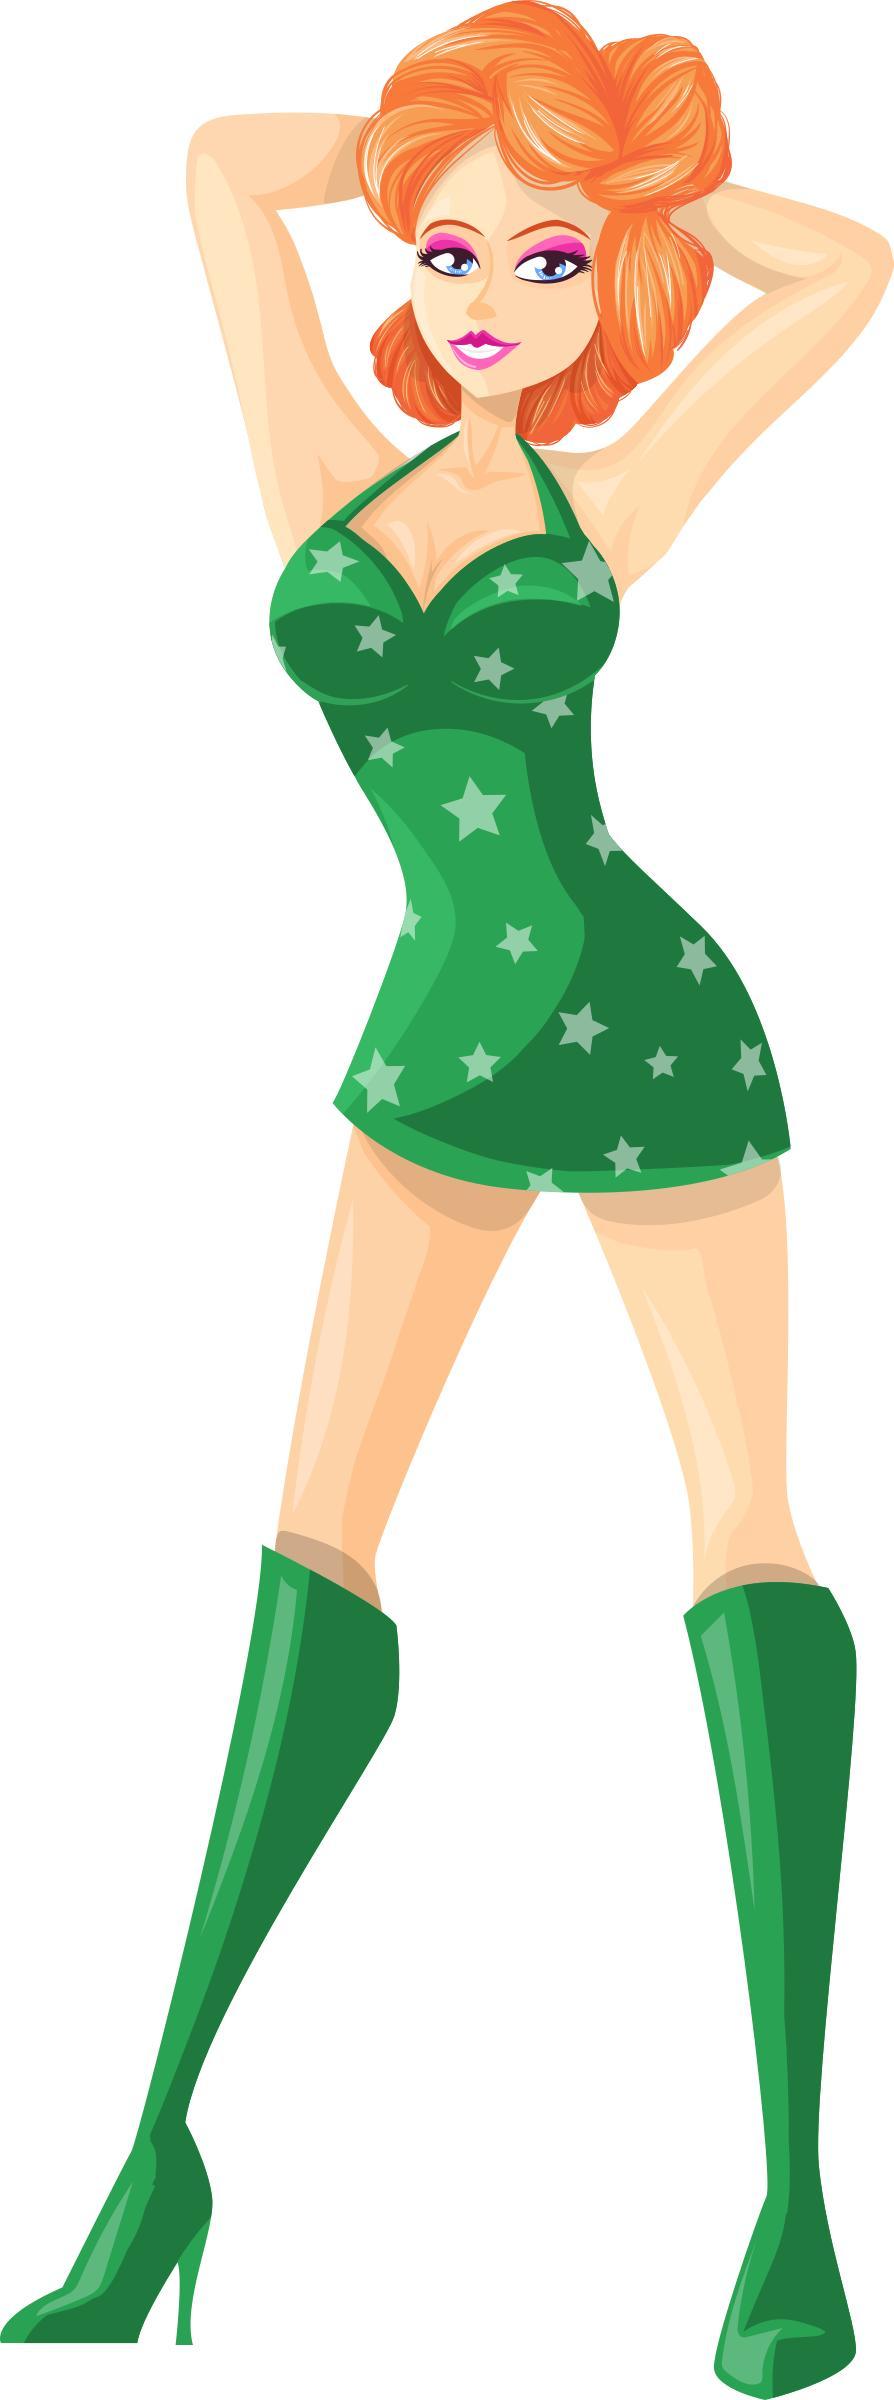 Young lady 2 (redhead, light skin, starry dress #4) png transparent